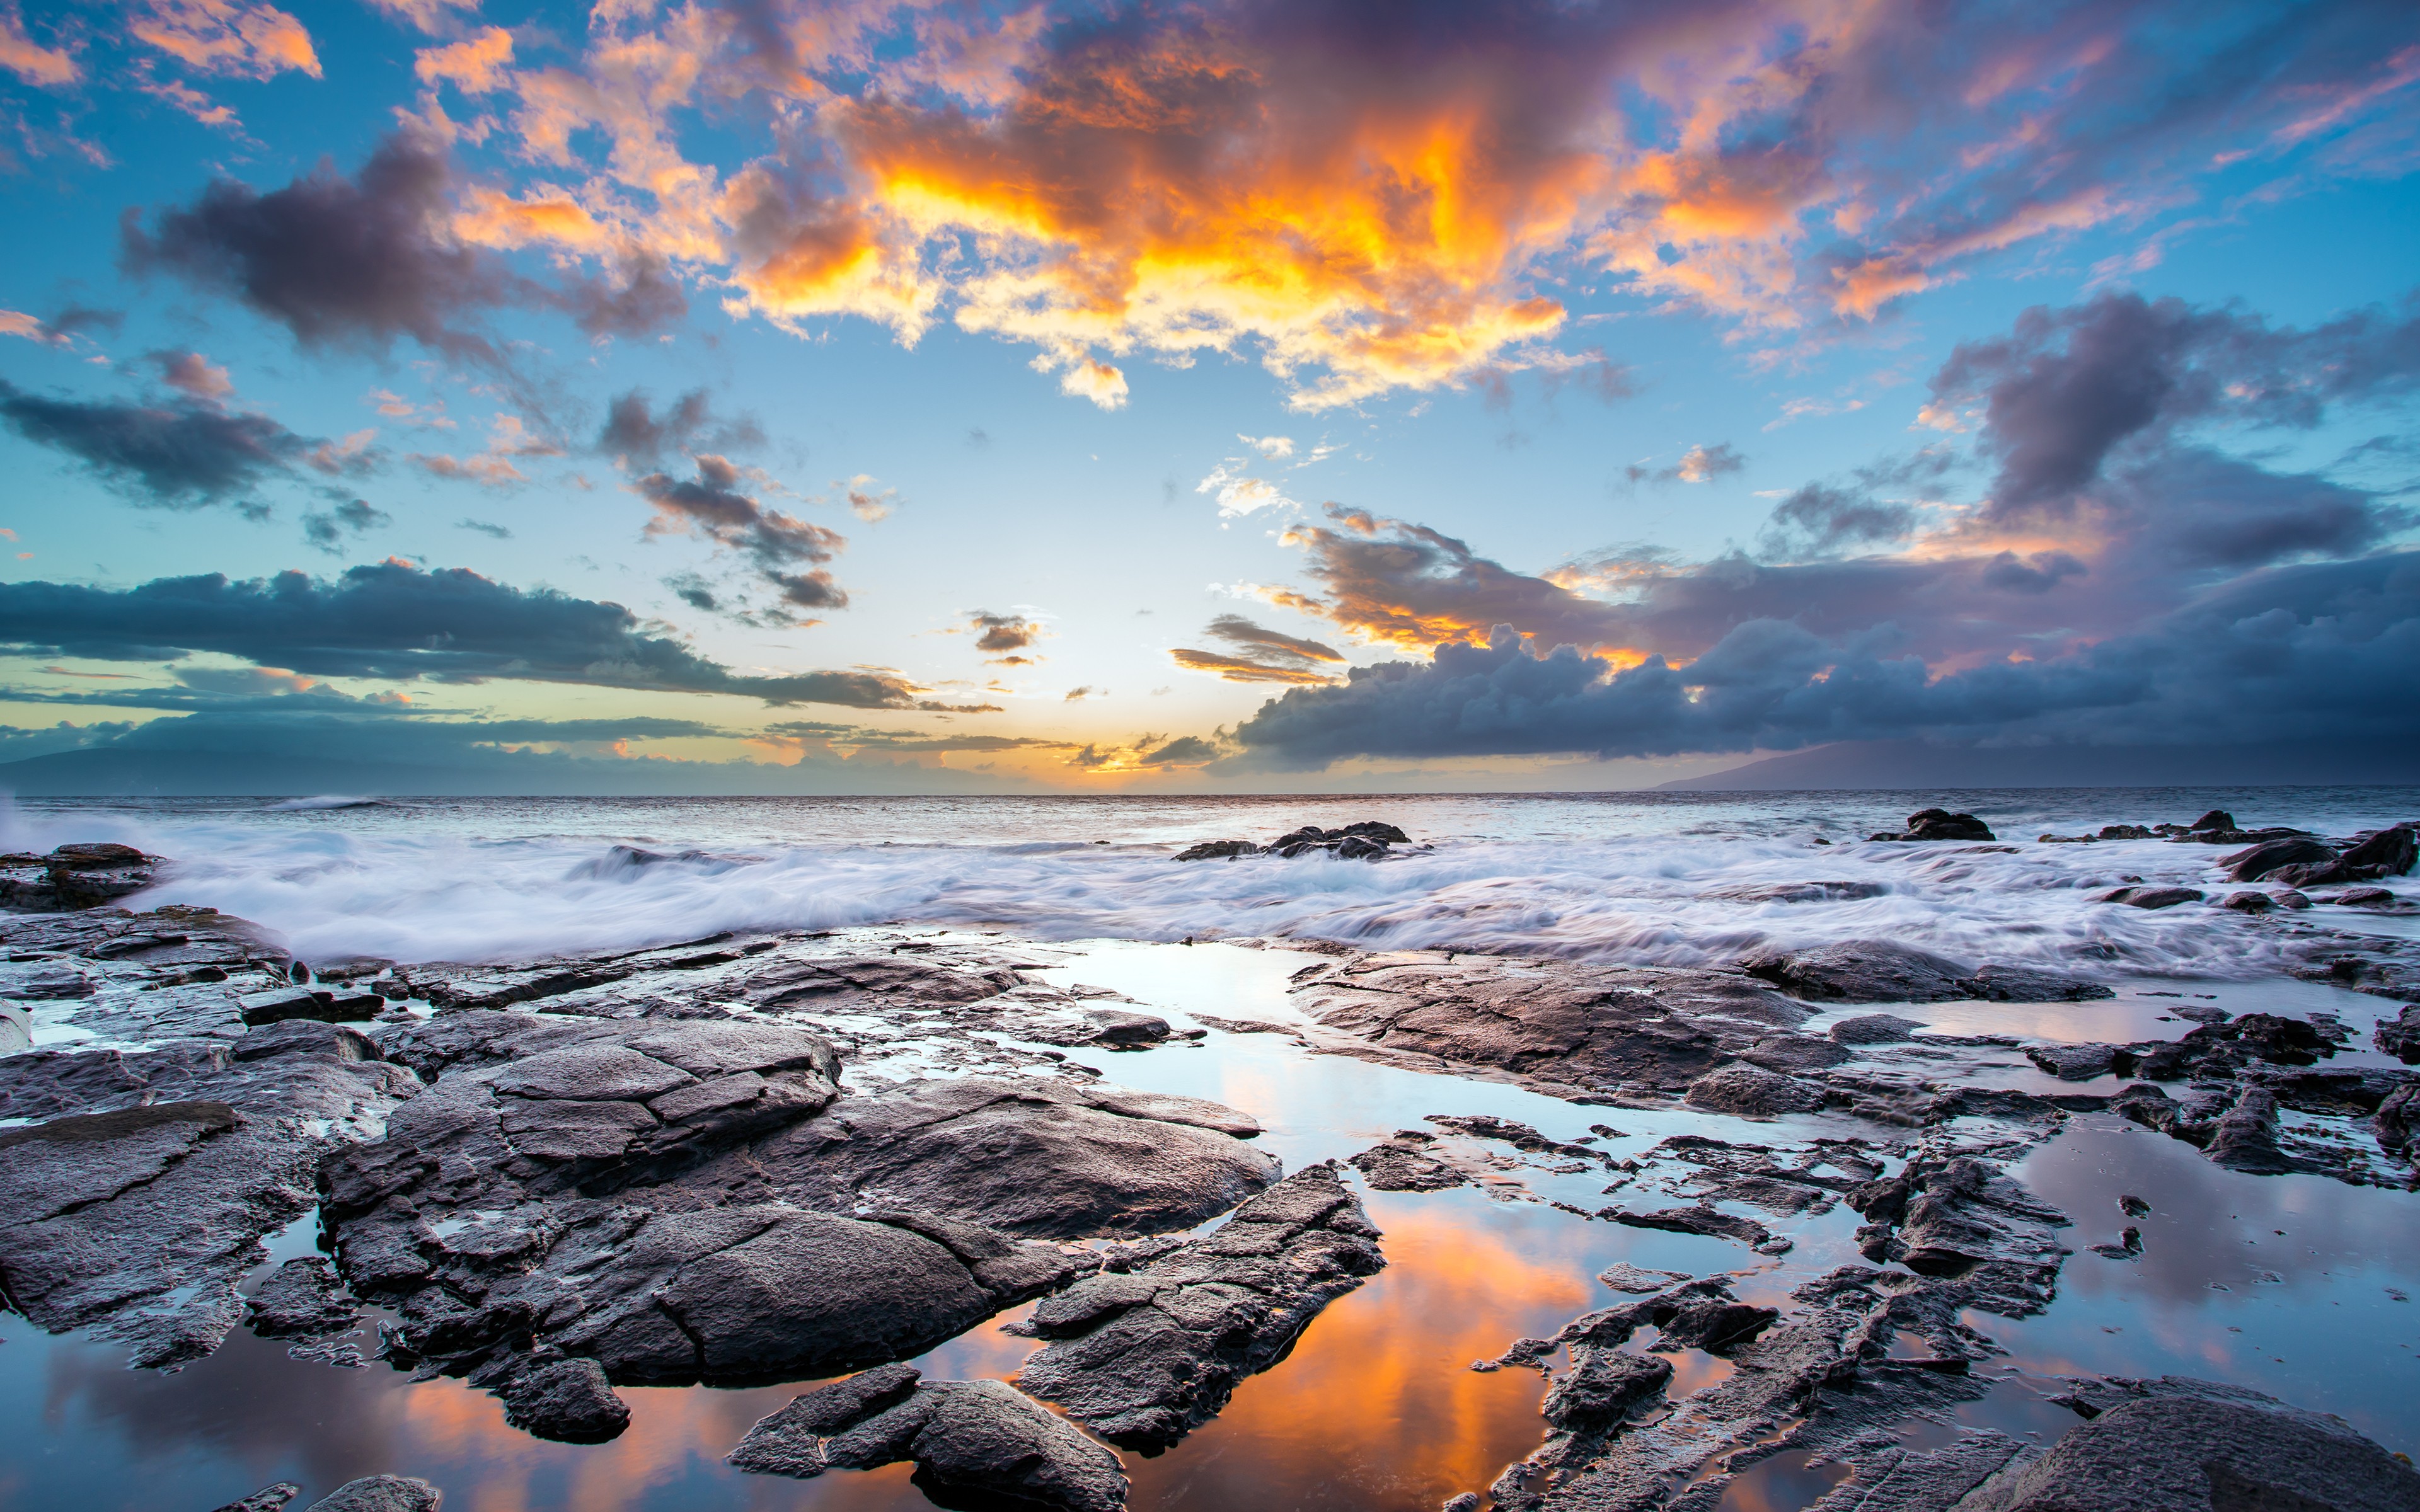 sunset, Clouds, Landscapes, Nature, Coast, Waves, Rocks, Hawaii, Usa, Hdr, Photography, Reflections, Sea Wallpaper